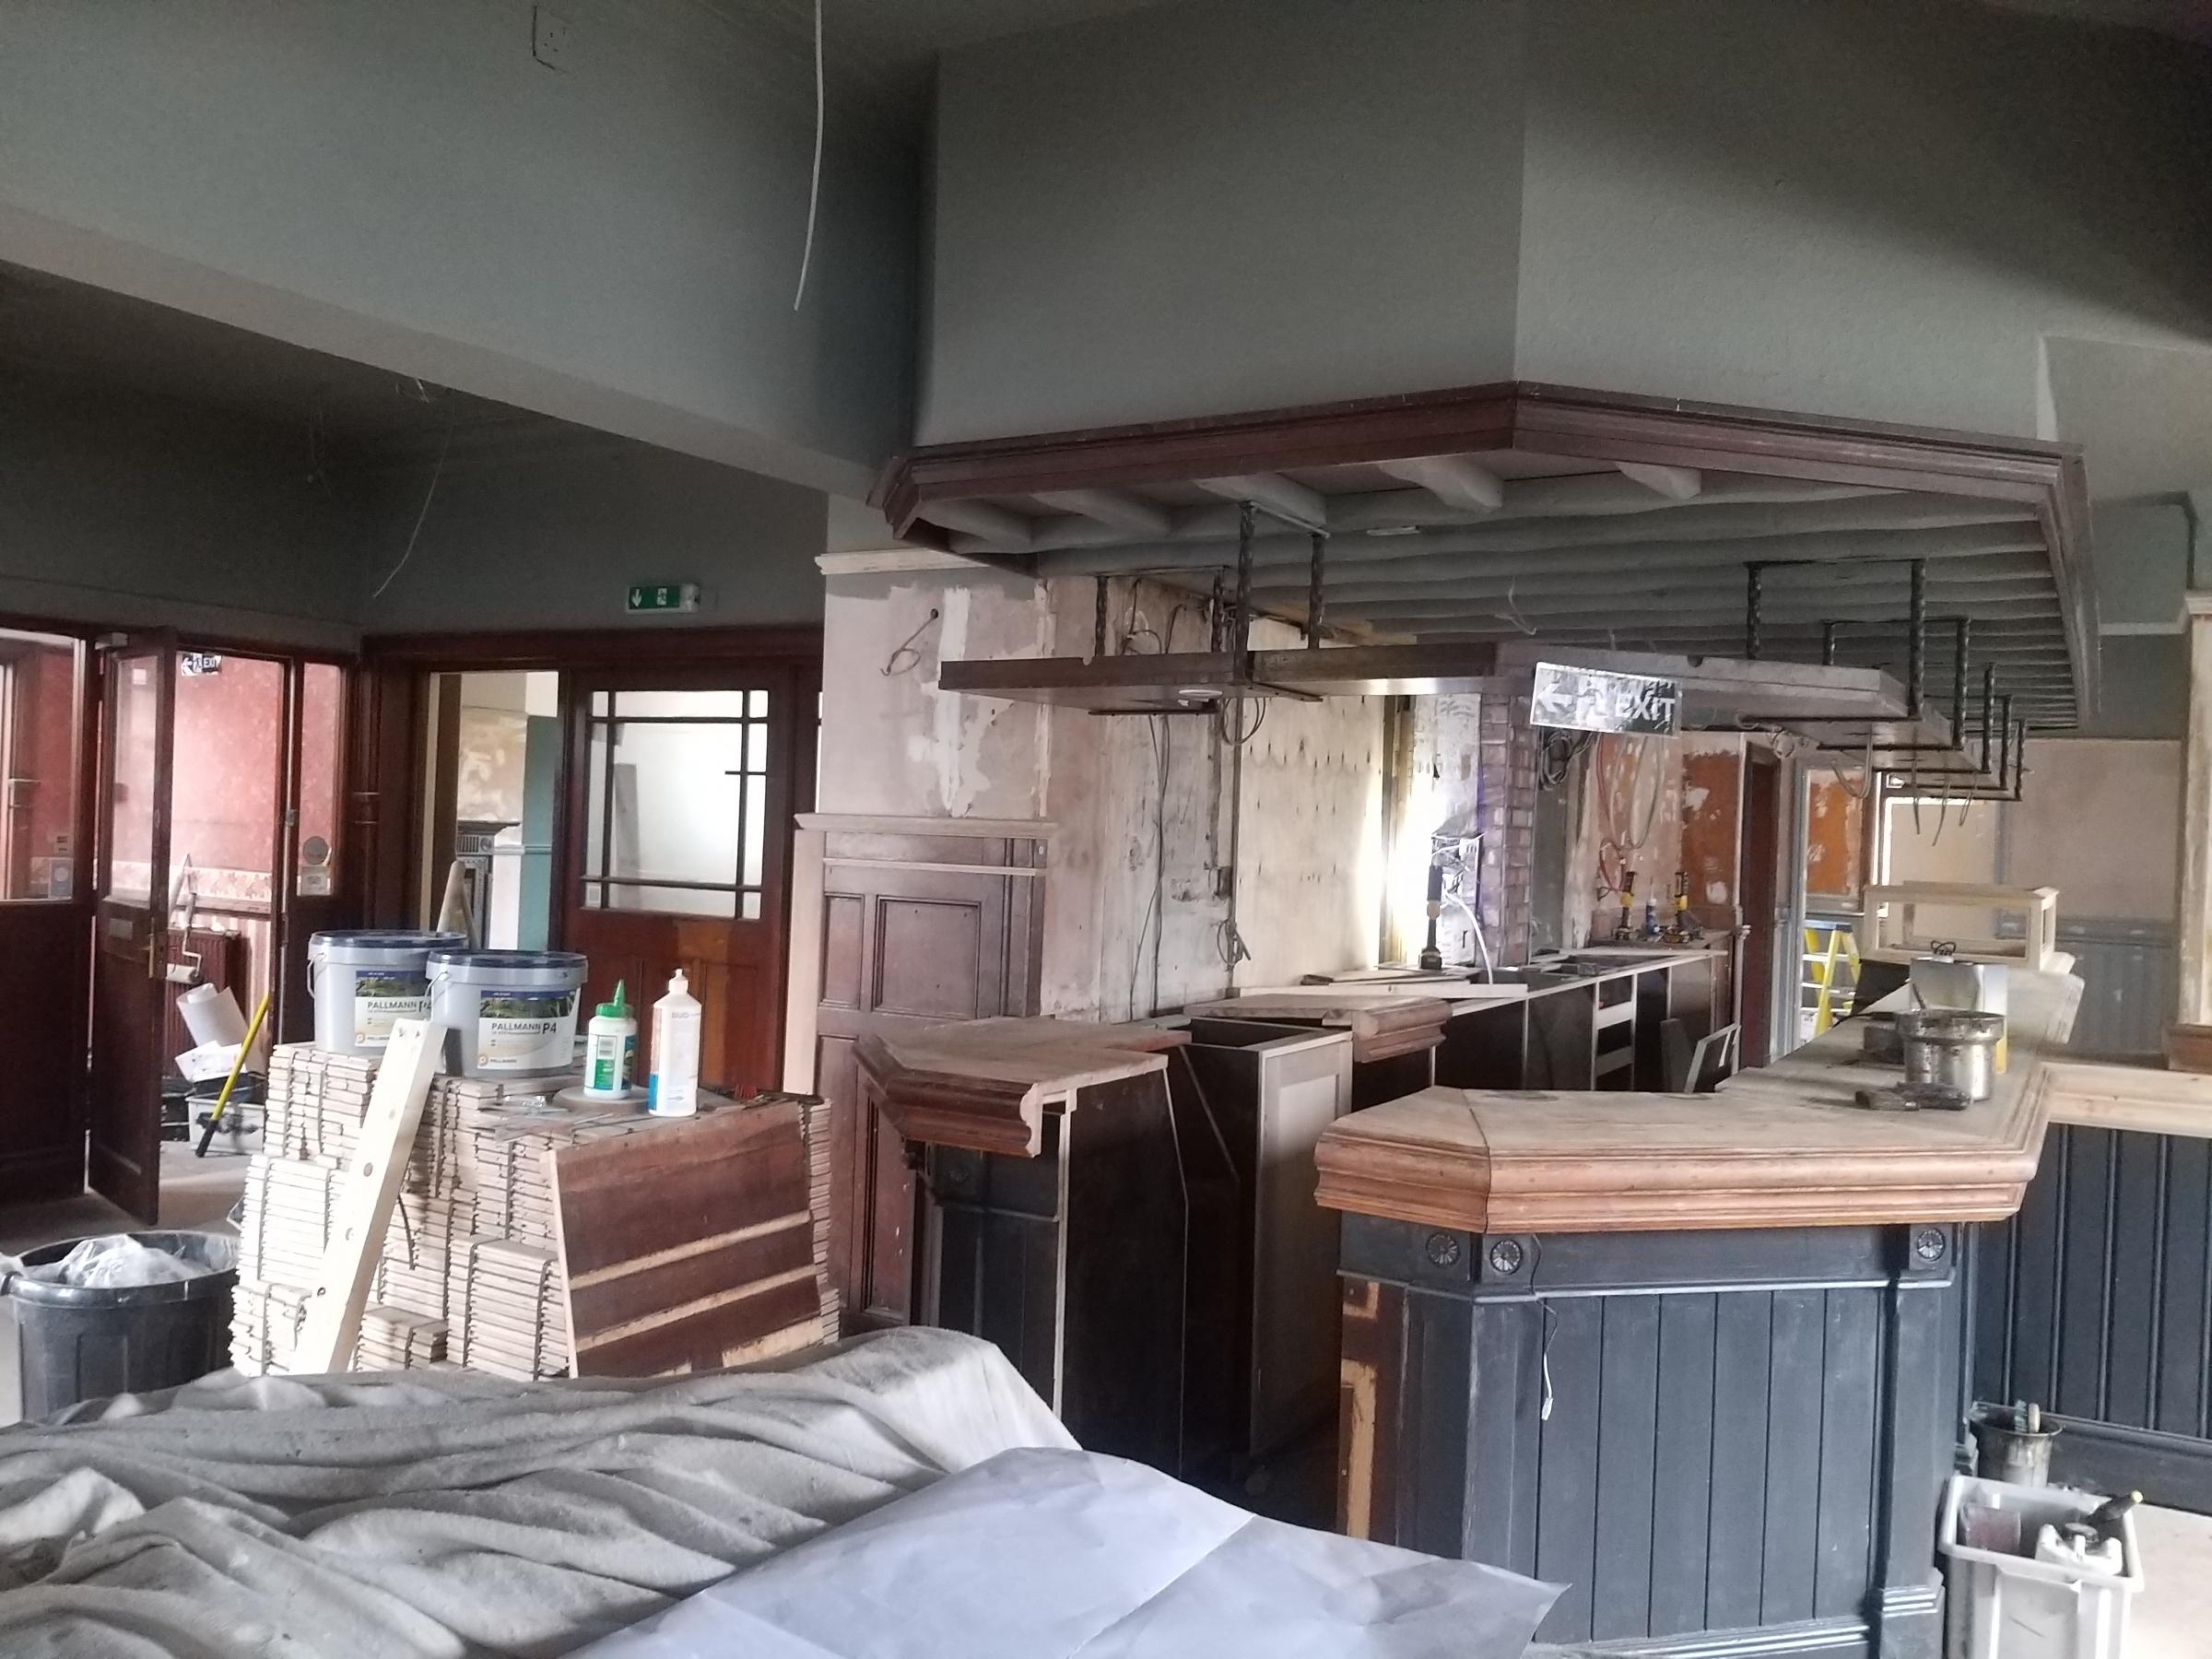 Work is ongoing at The Pied Bull